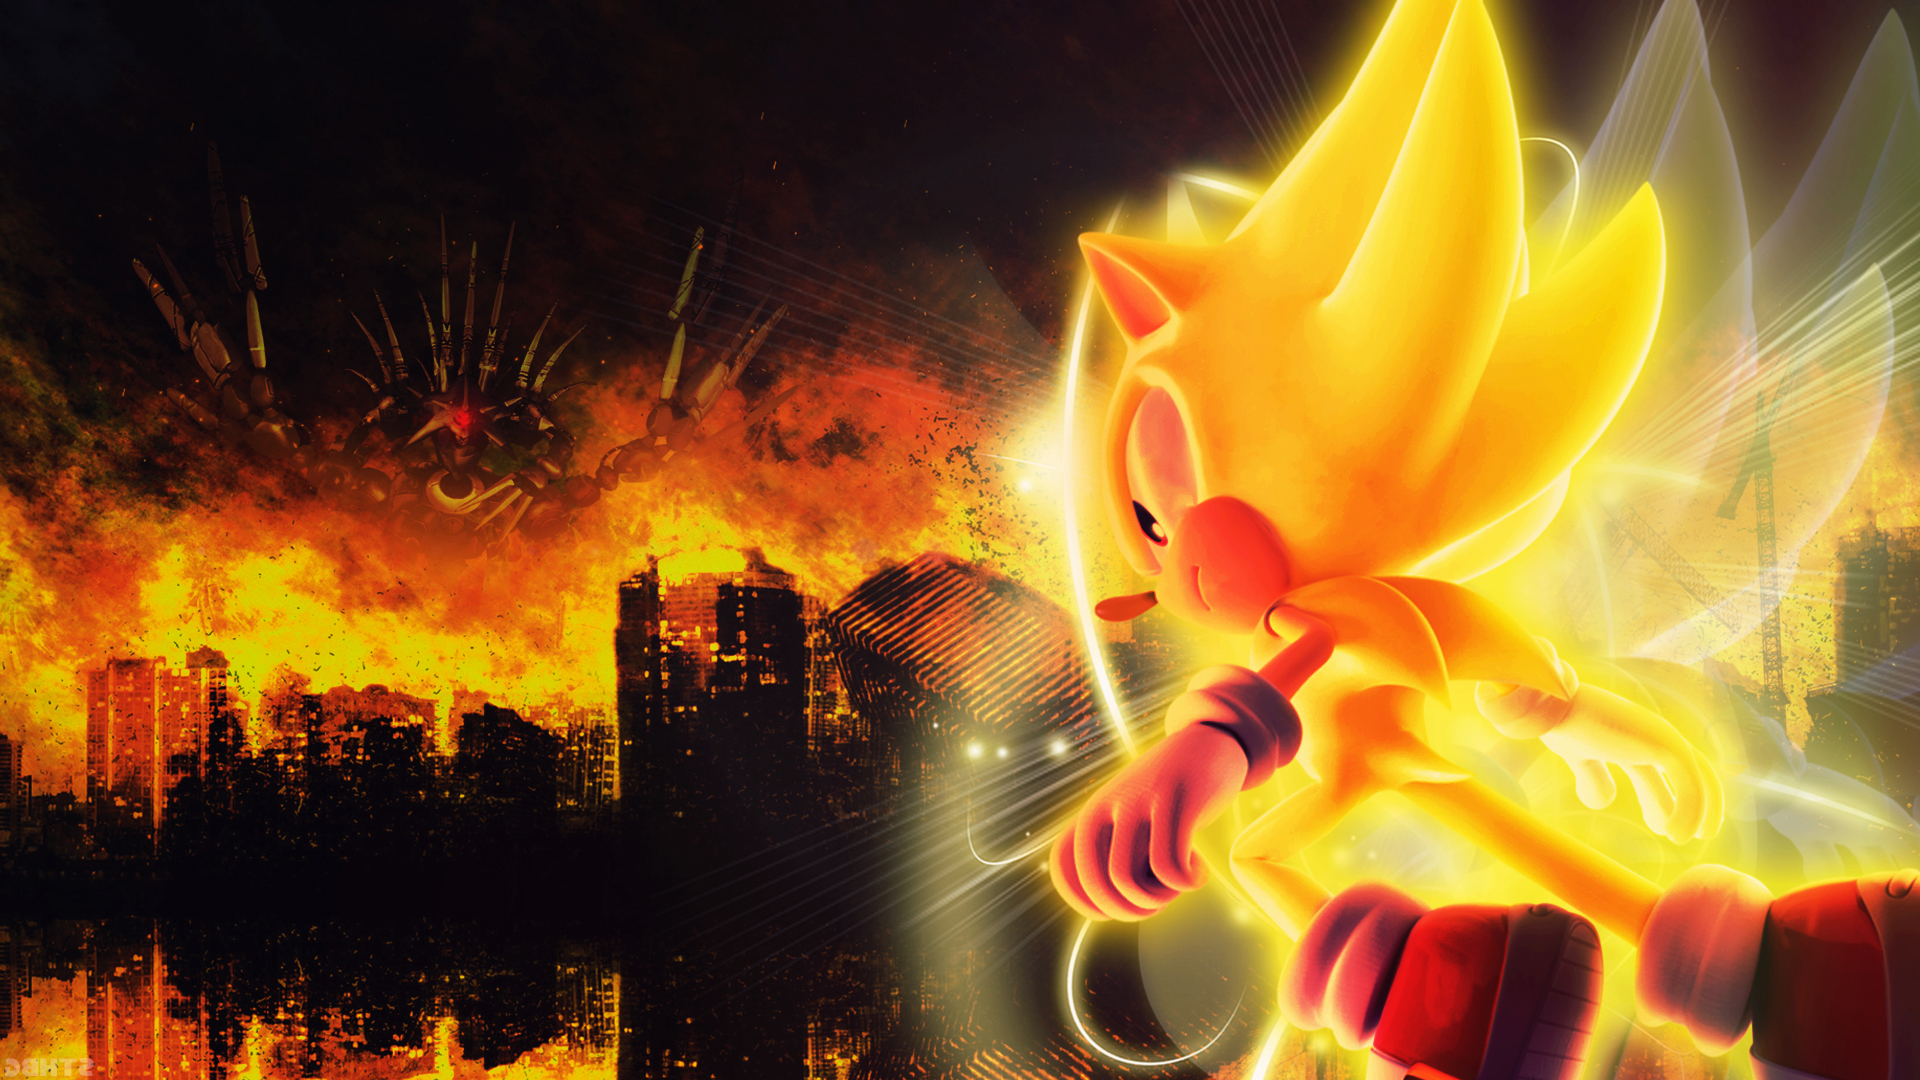 WallPapers on SonicUniverses Group - DeviantArt